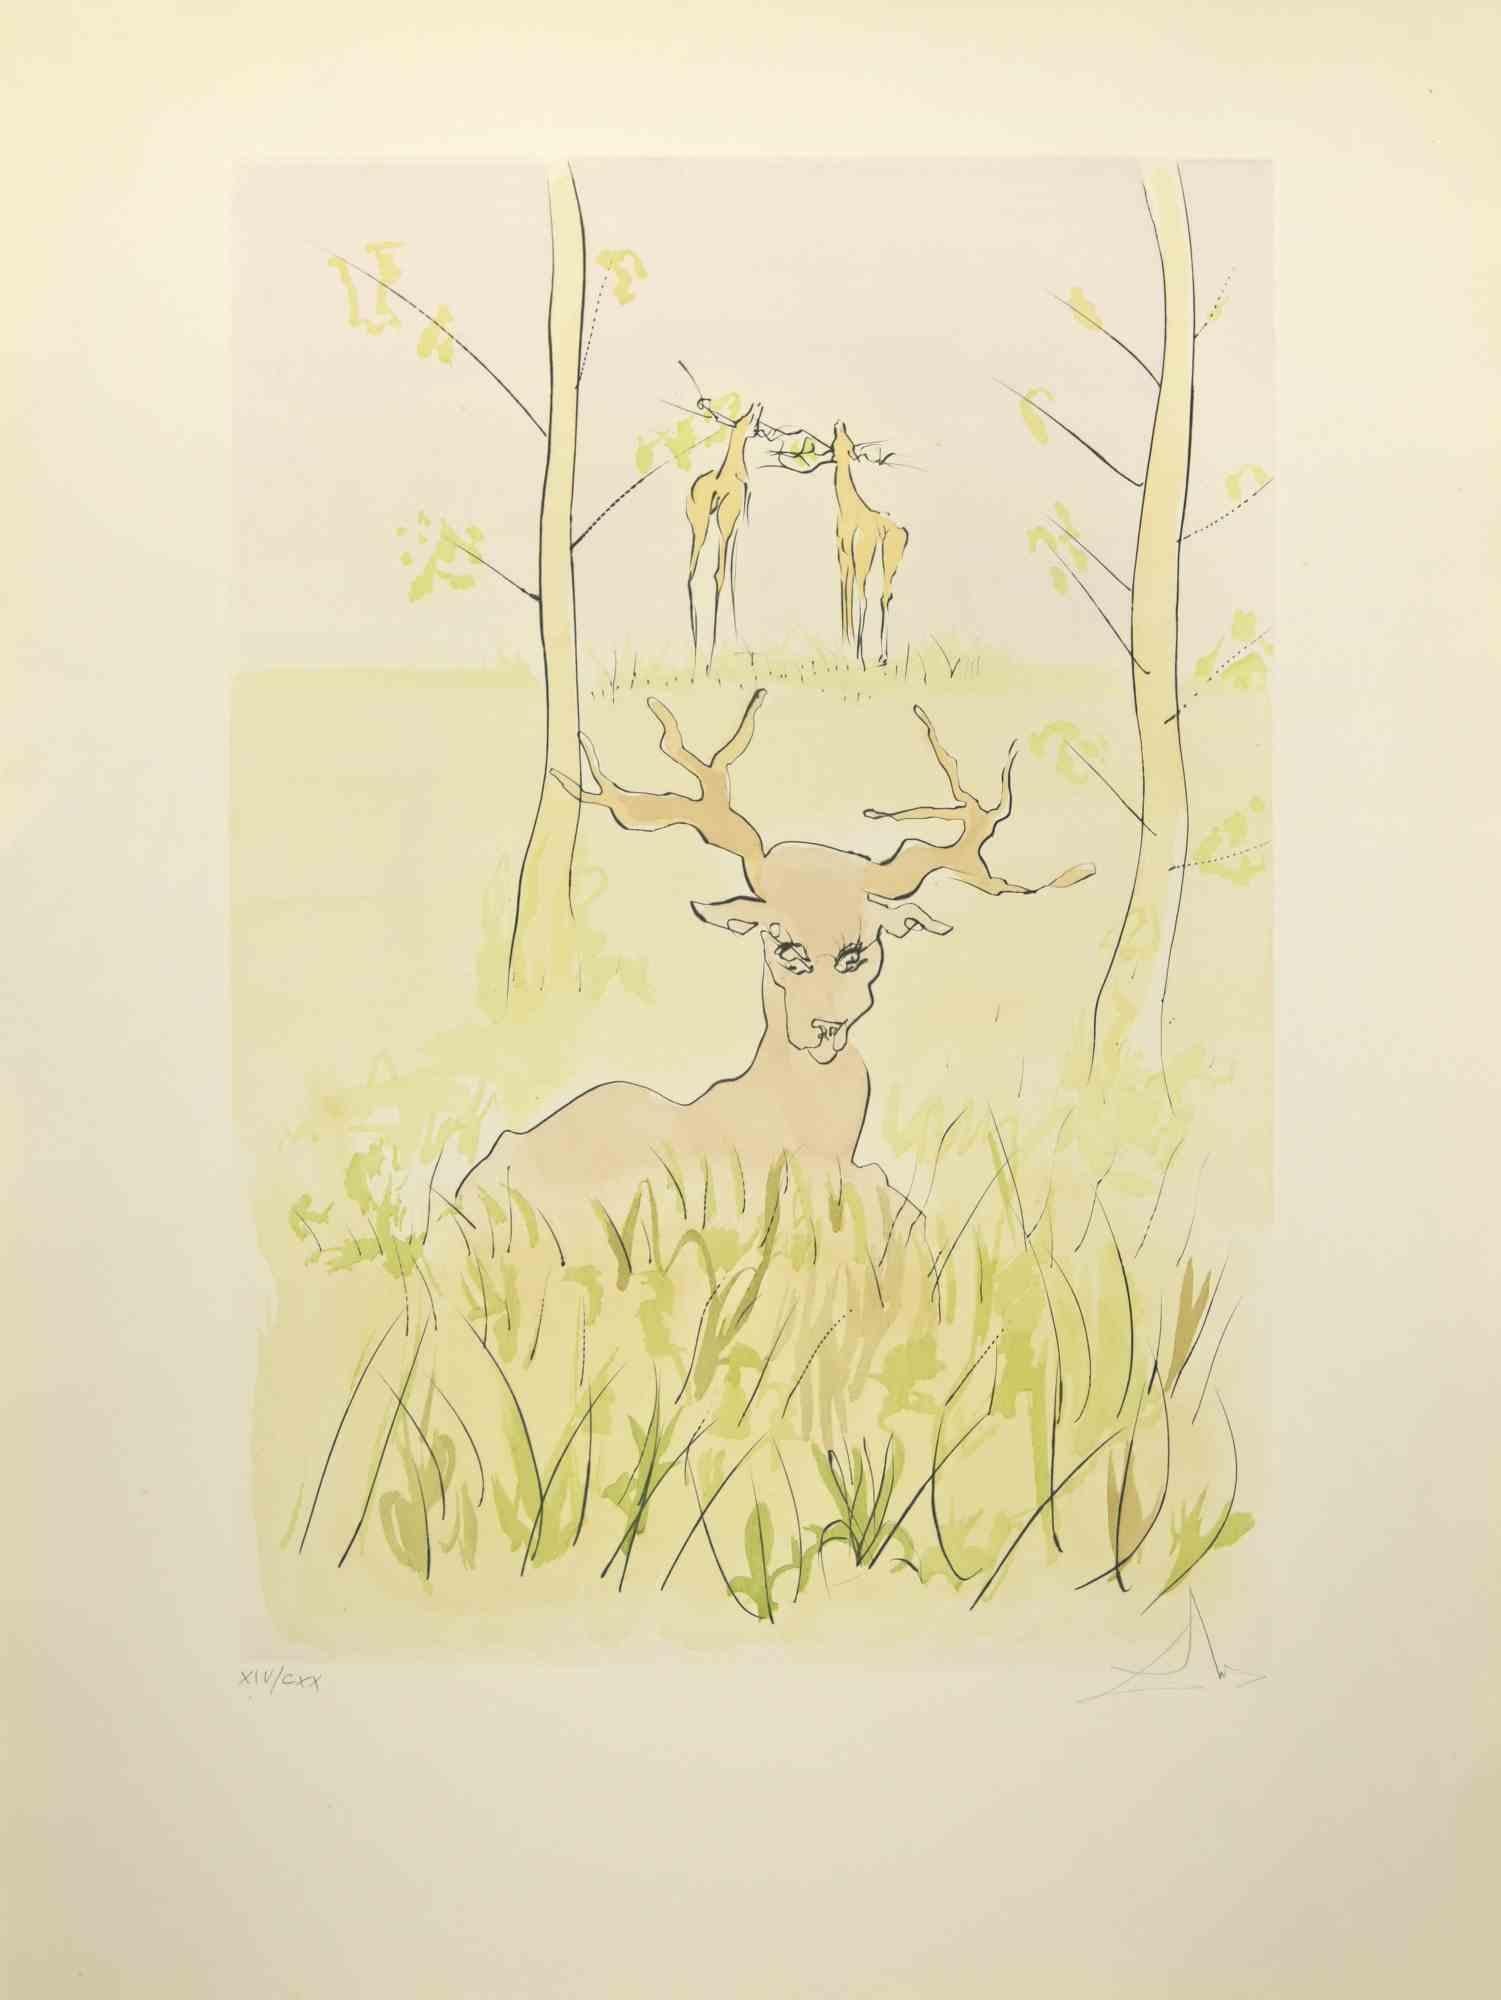 Salvador Dalí Animal Print - The Sick Stag - Etching  - 1974